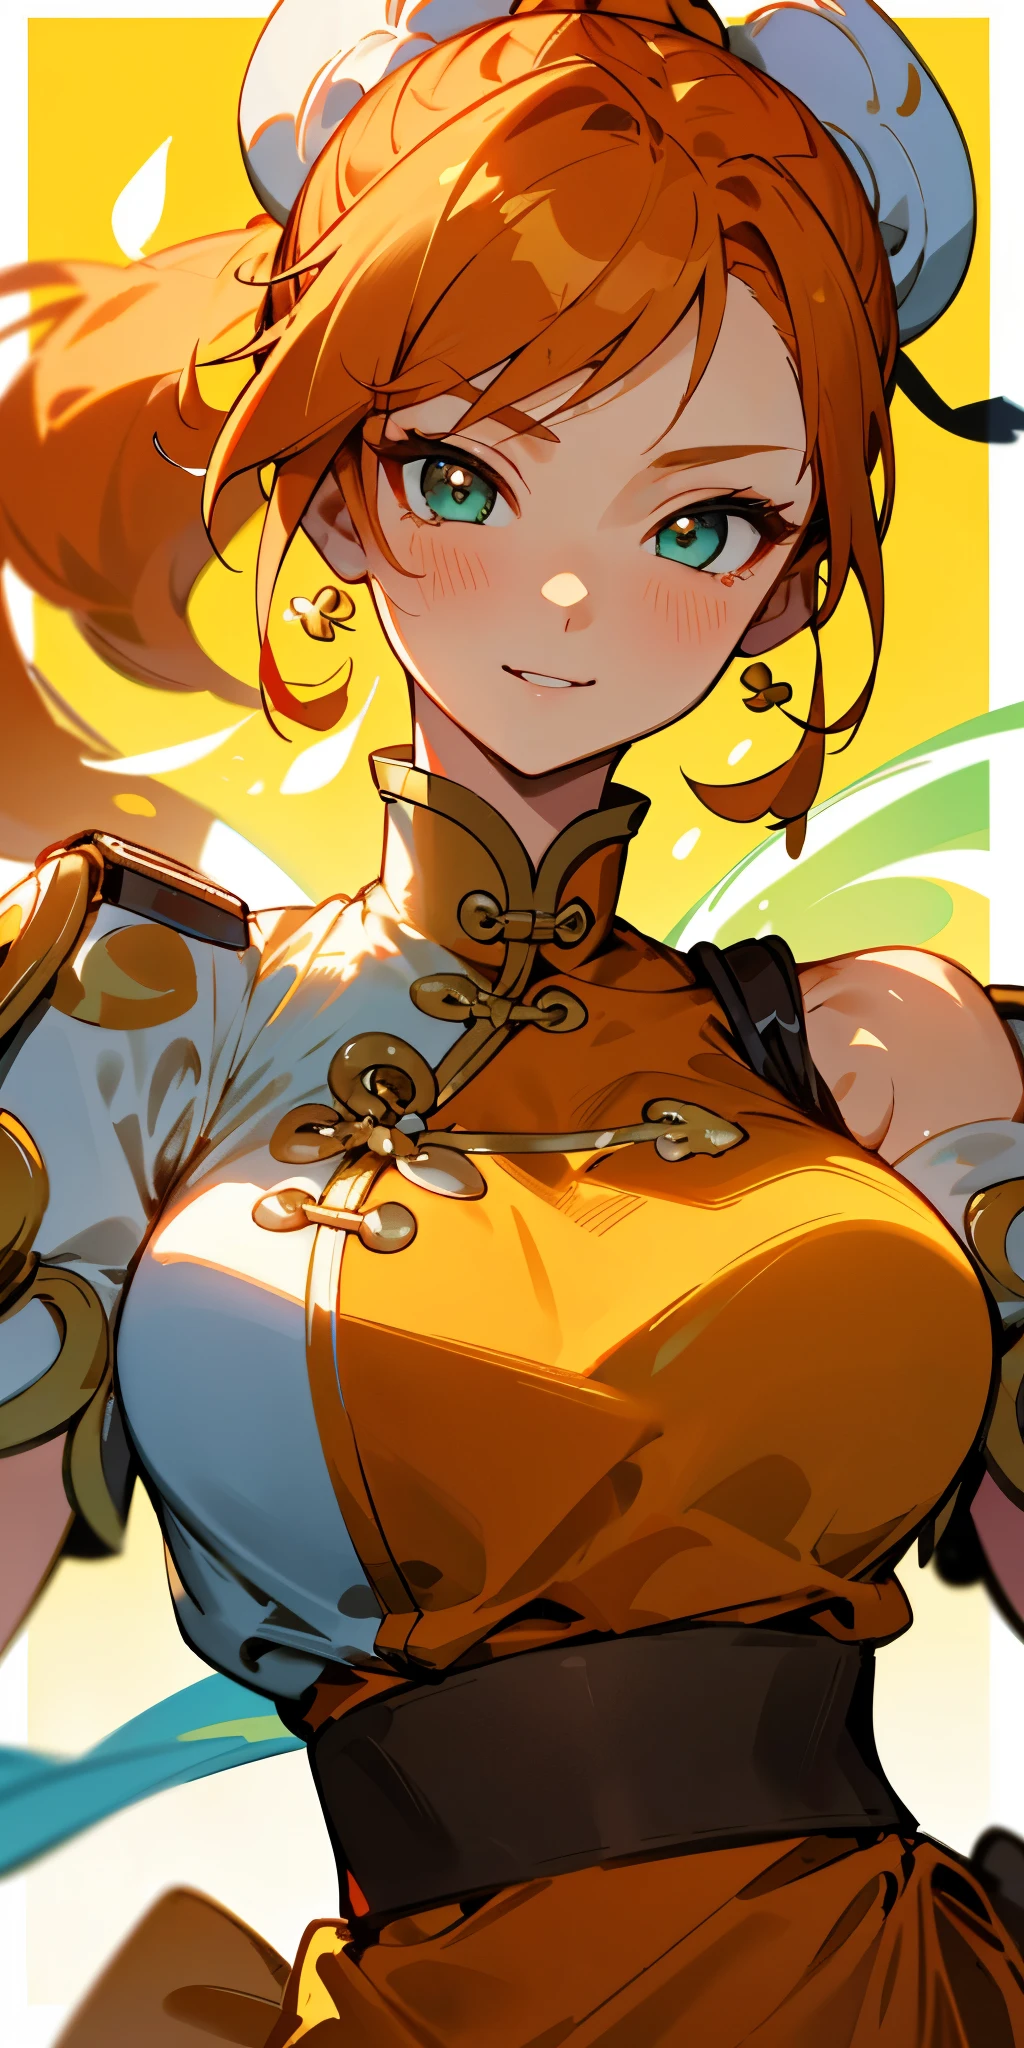 1 girl、one person、skinny body shape、orange clothes、orange hair、ponytail、beautiful green eyes、intense joy on the face、white uniform with golden decorations、upper body close-up, style of Chun-li clothes